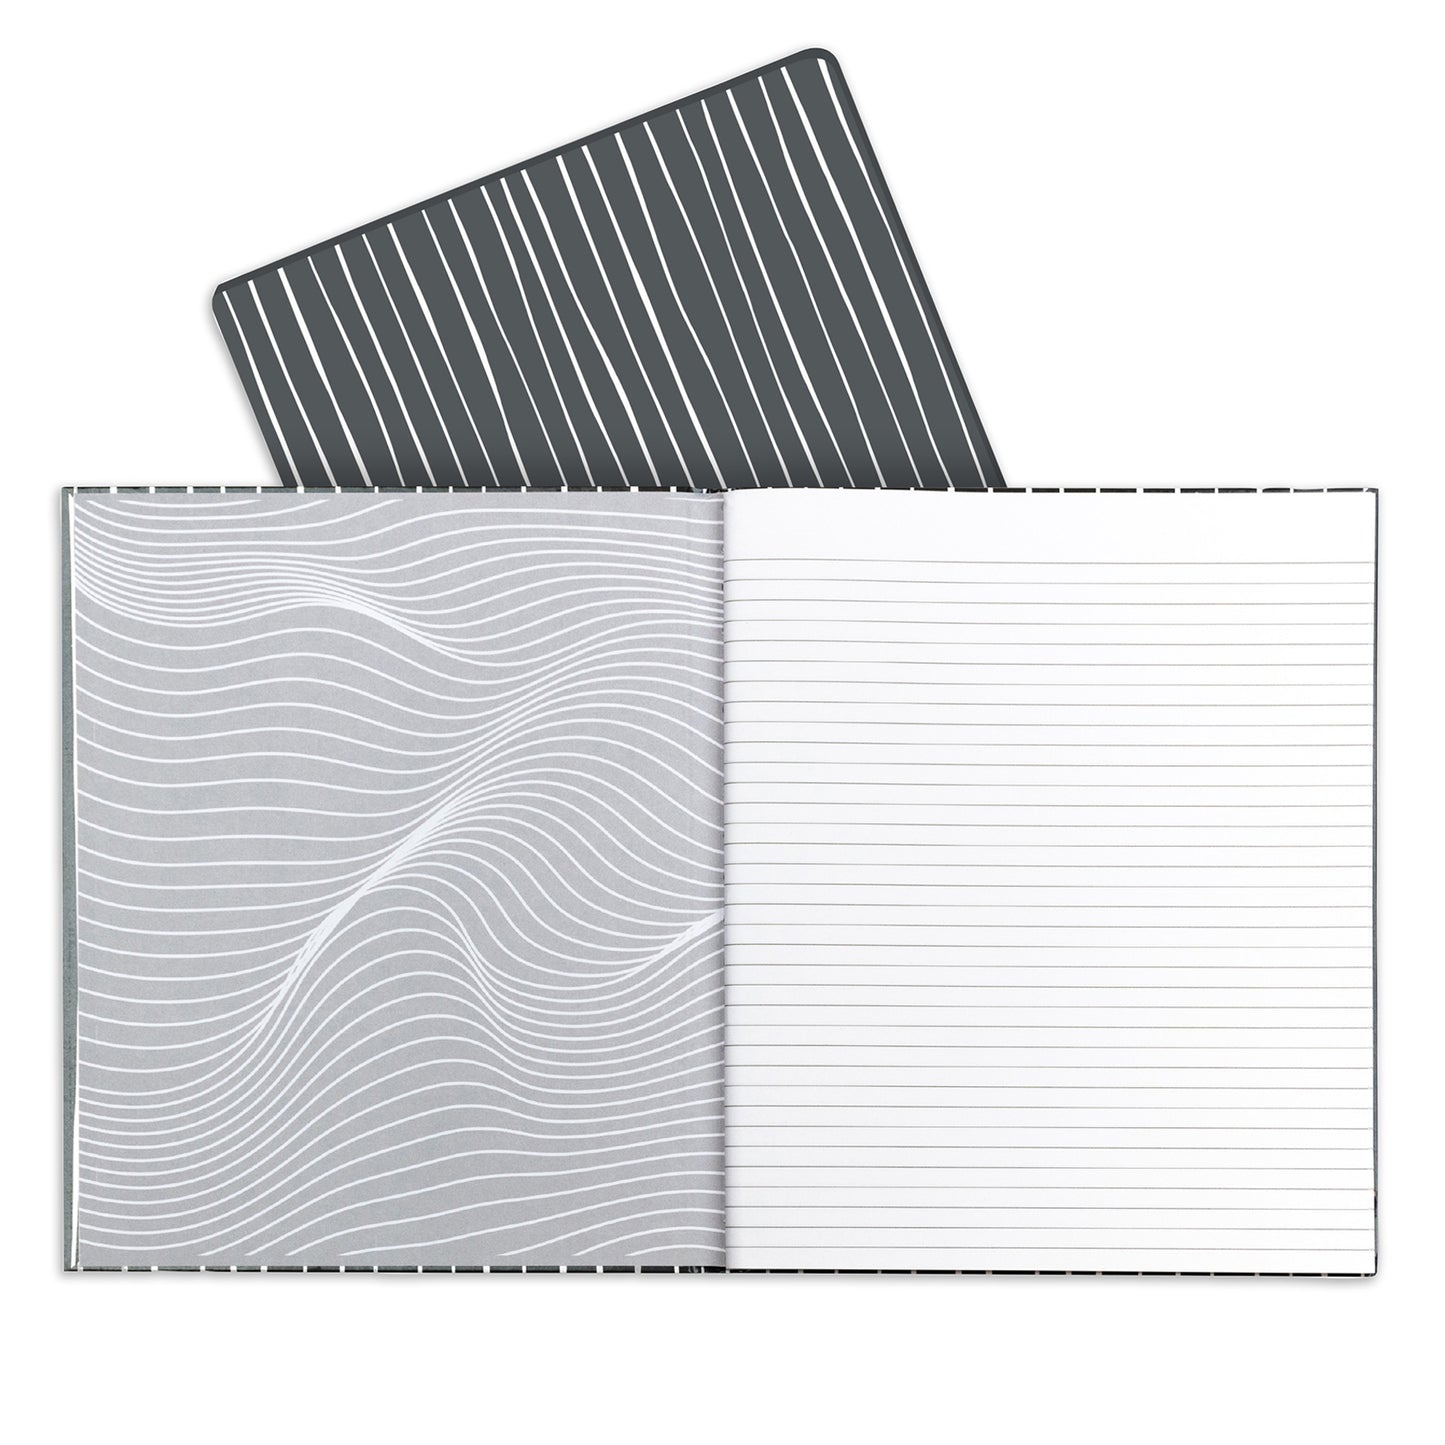 Professional Hardbound Notebook, 96 Page, College Ruled, 8-1/2" x 10-7/8", Charcoal & White Stripes, Pack of 2